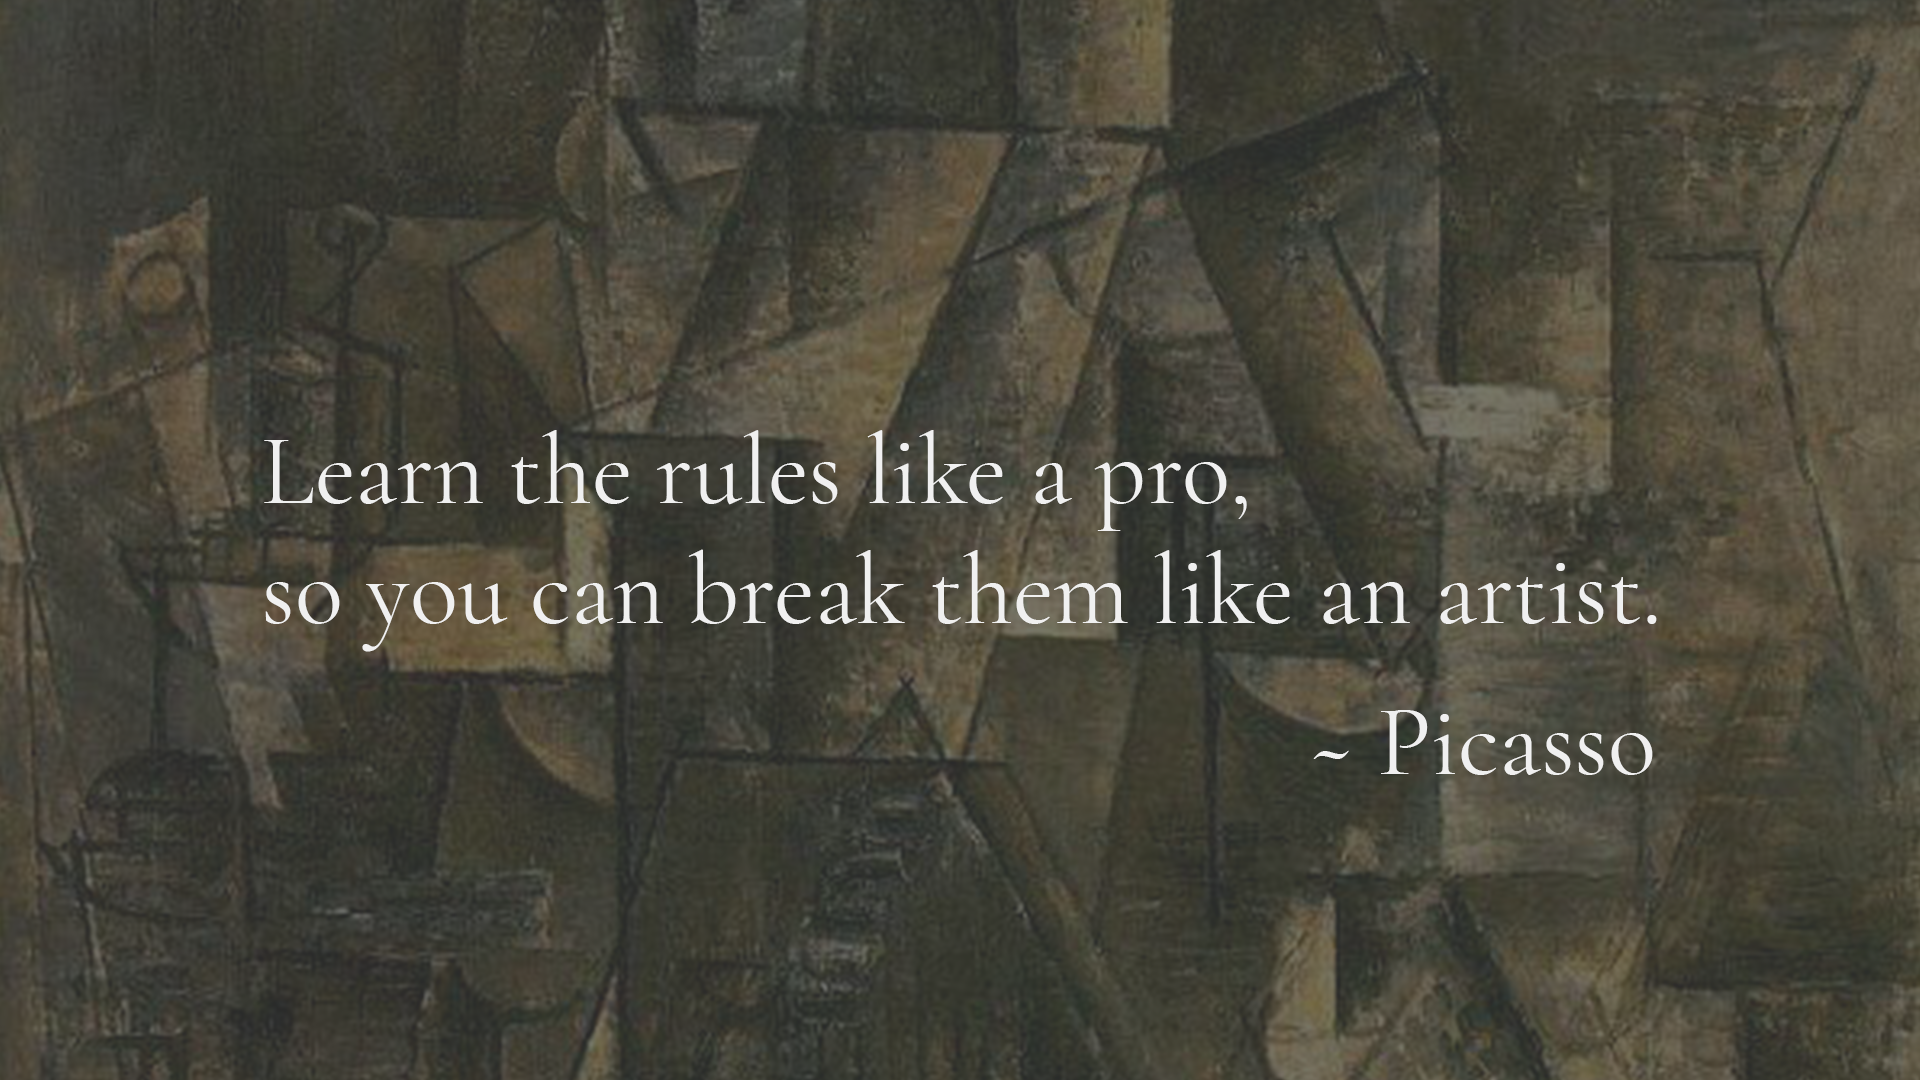 A quote from Picasso, "Learn the rules like a pro, so you can break them like an artist."